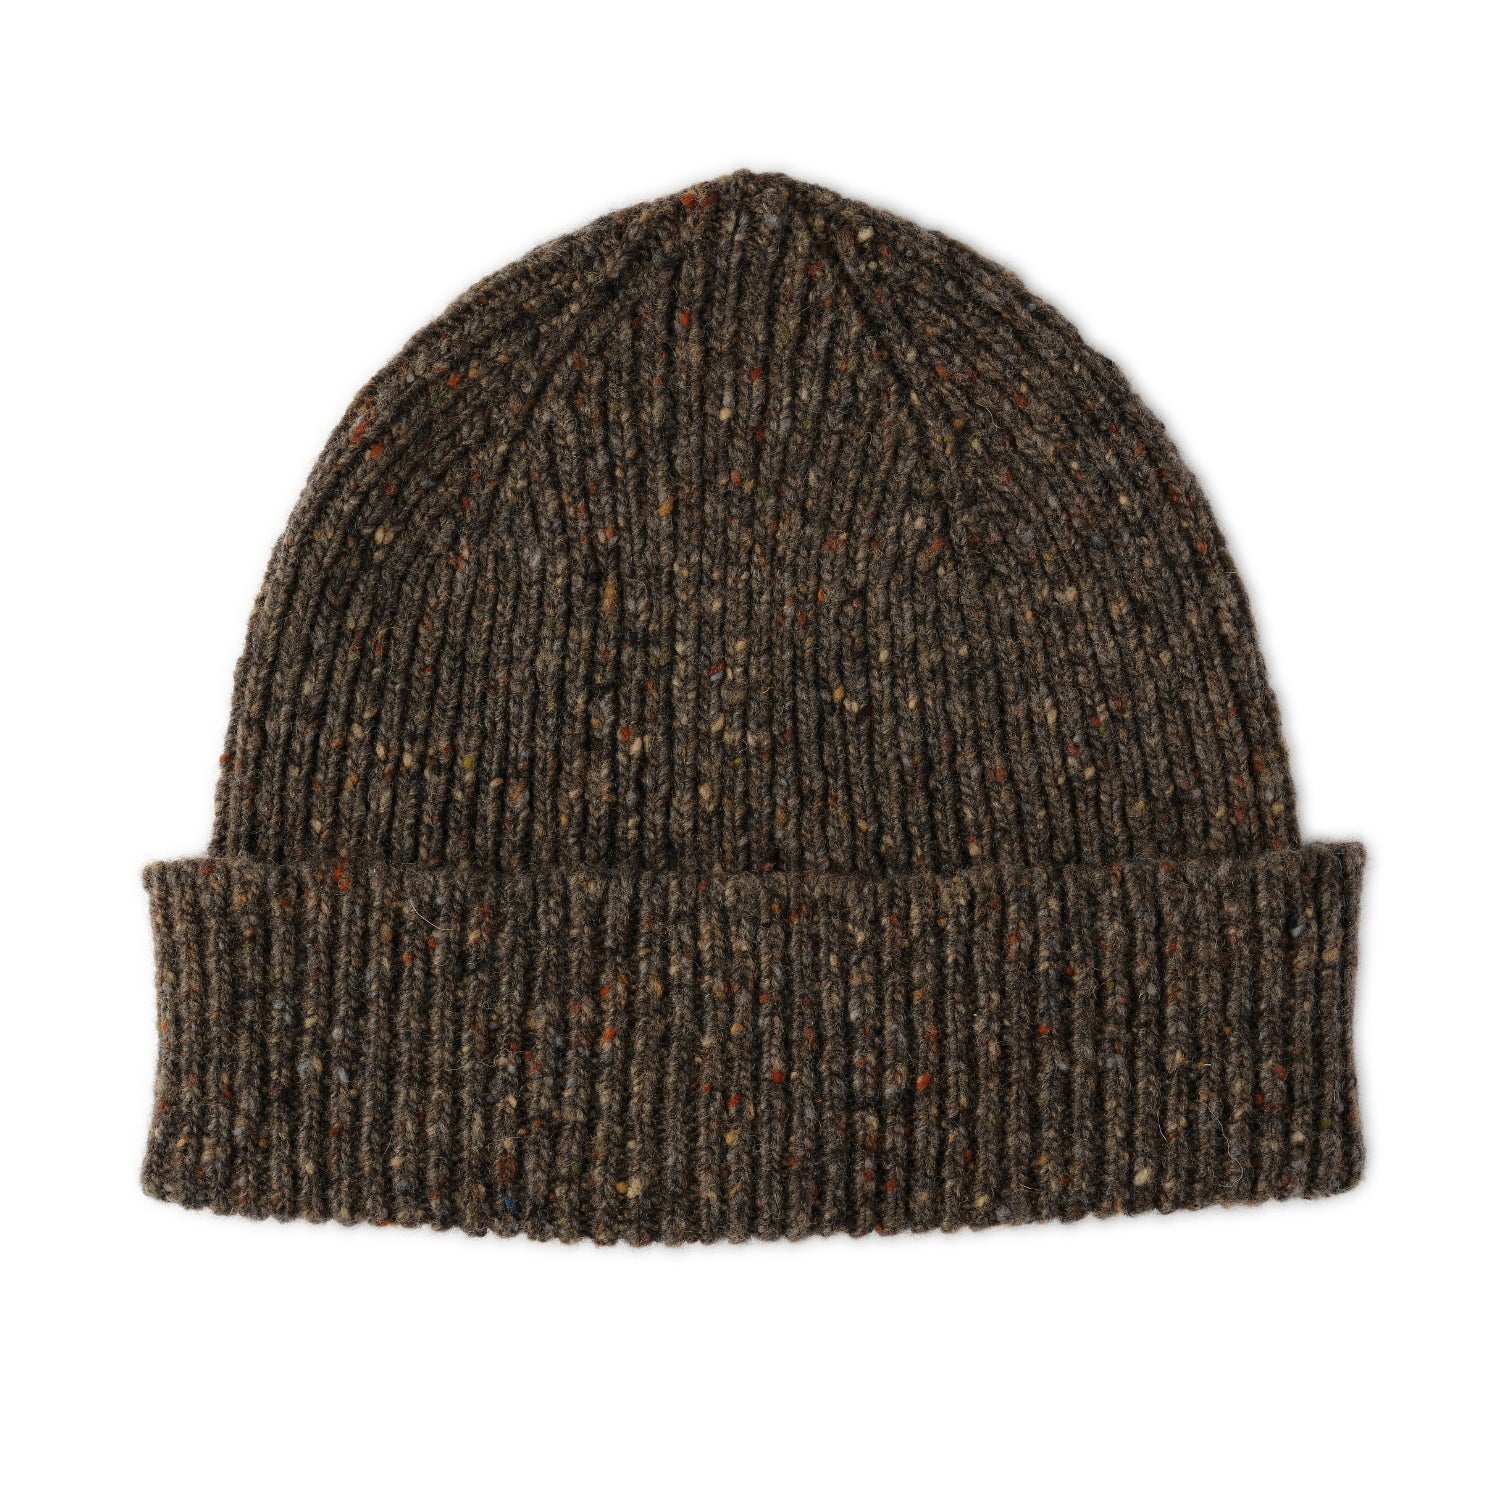 mens donegal wool brown beanie hat gift set